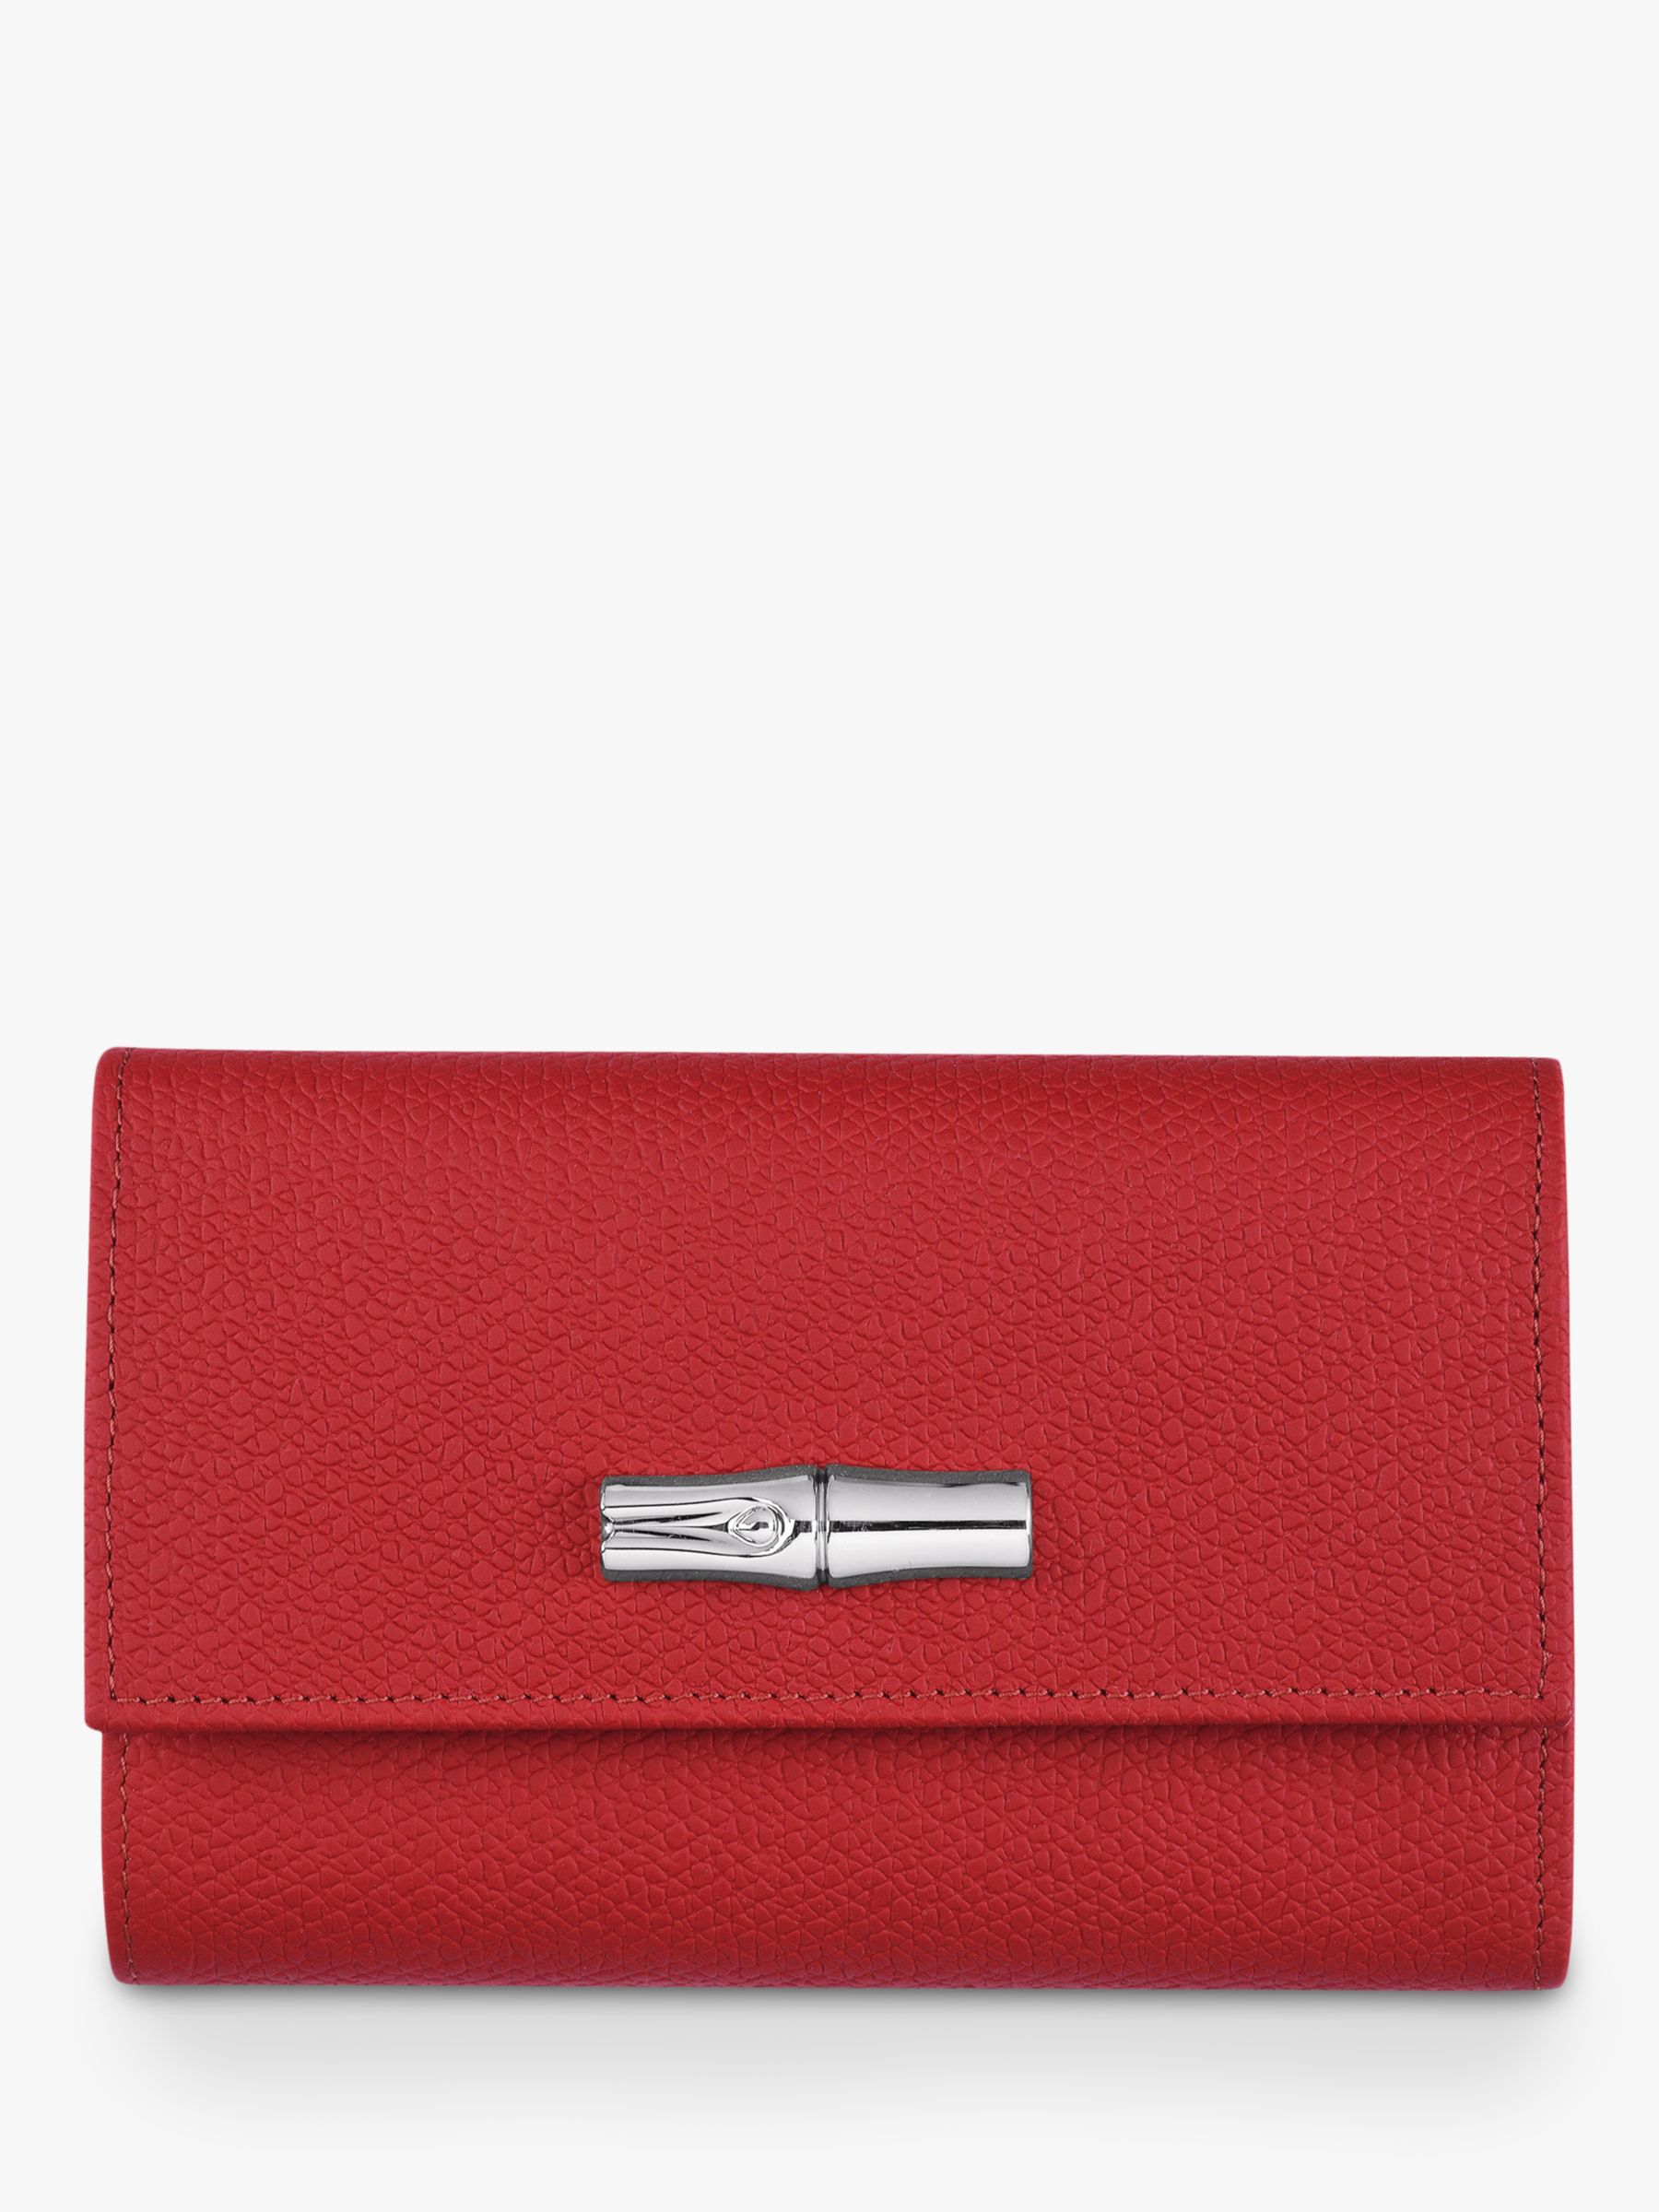 Longchamp Roseau Leather Compact Wallet, Red at John Lewis & Partners